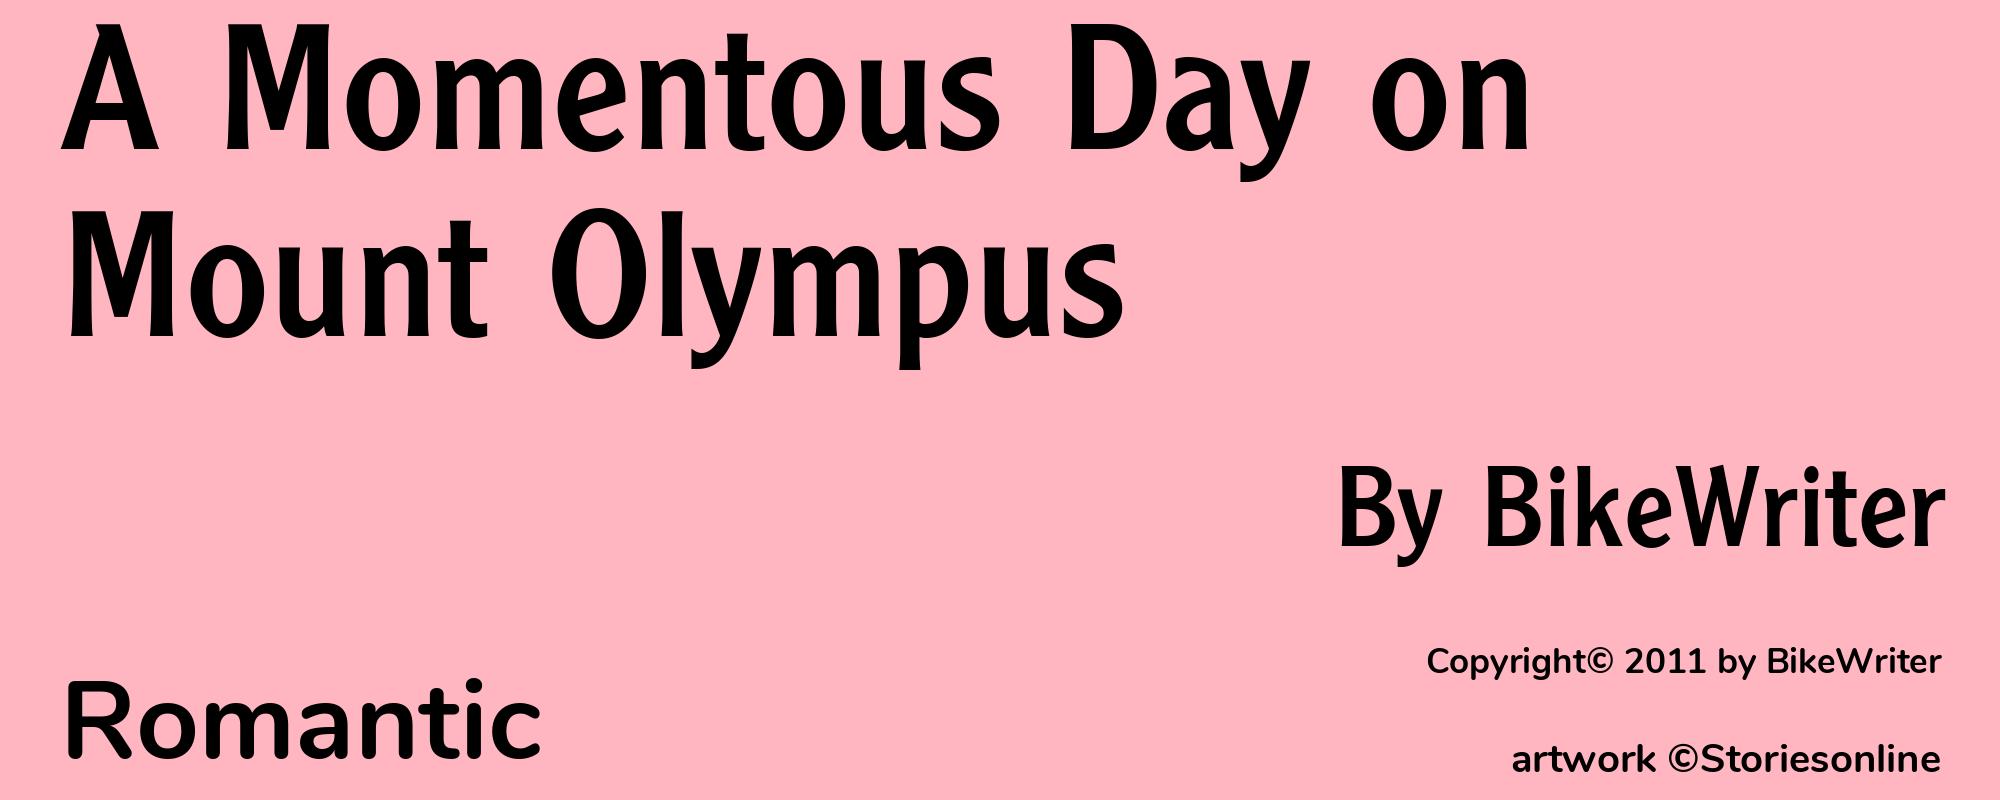 A Momentous Day on Mount Olympus - Cover